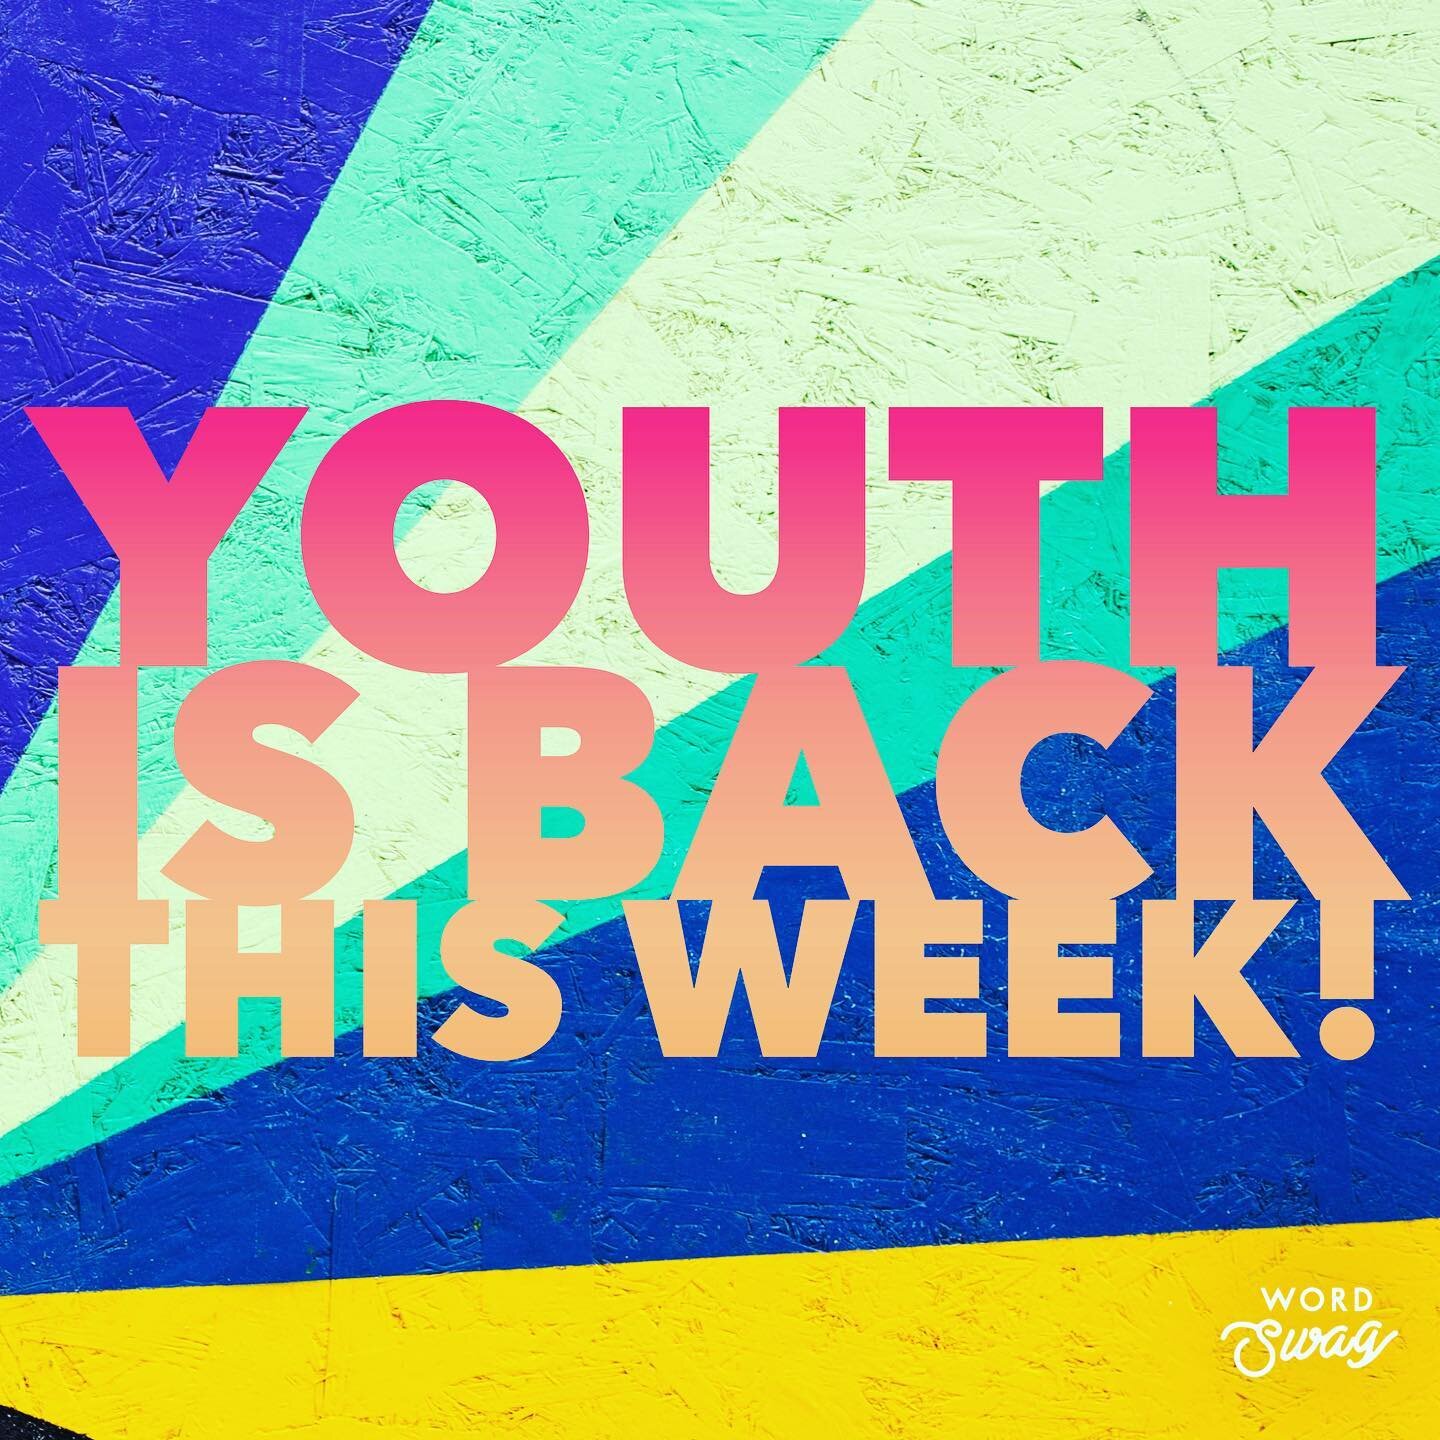 Sr. Youth - Tuesday @ 7:00-9:30
Jr. Youth - Thursday @ 7:00-9:00